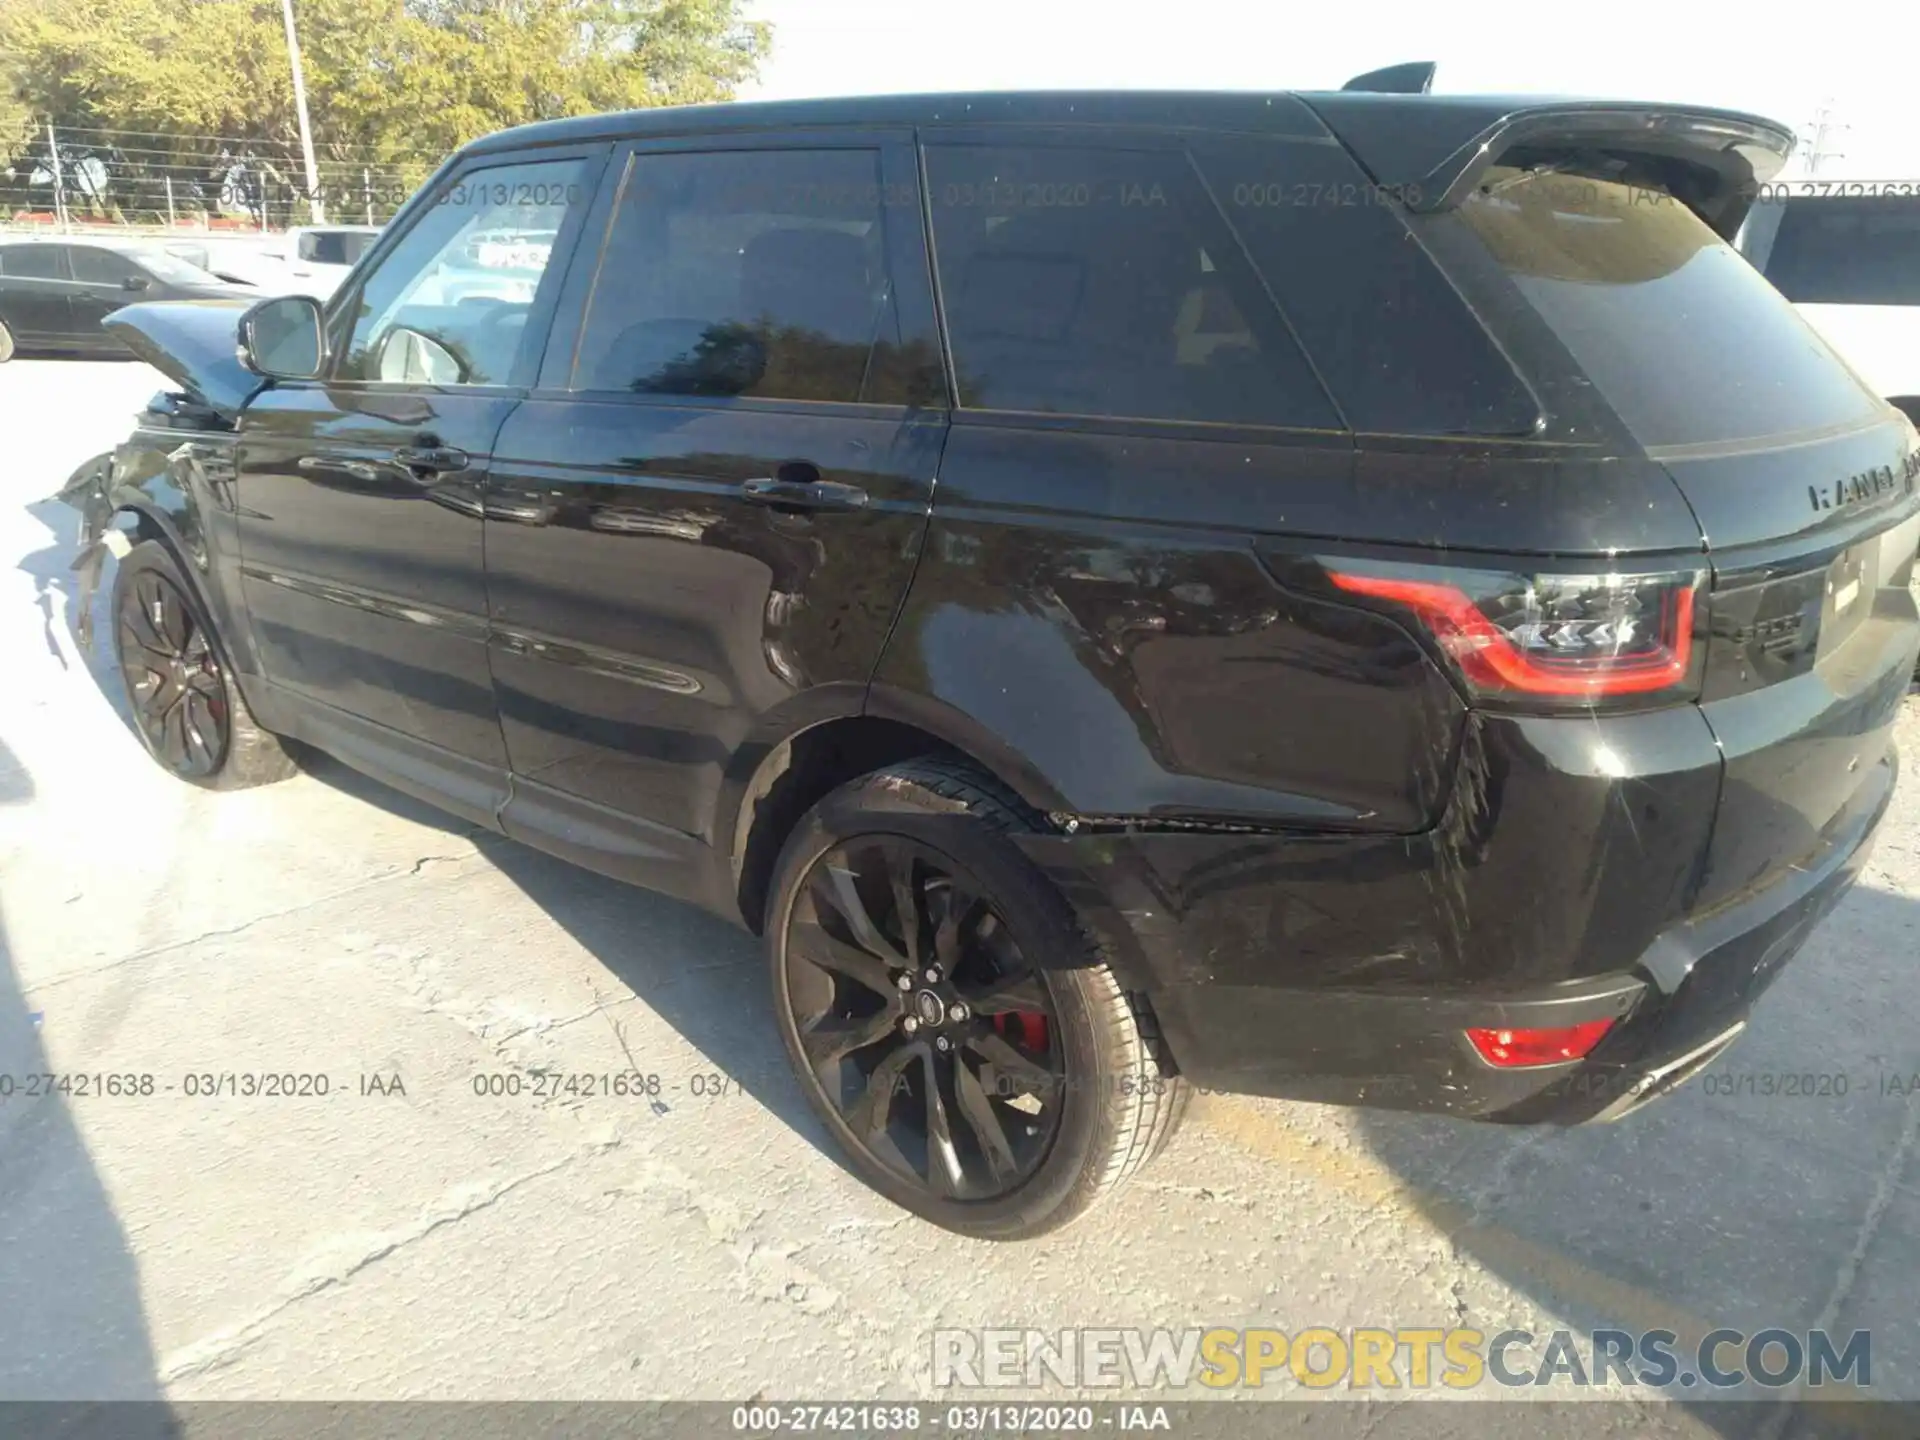 3 Photograph of a damaged car SALWG2RVXKA423559 LAND ROVER RANGE ROVER SPORT 2019